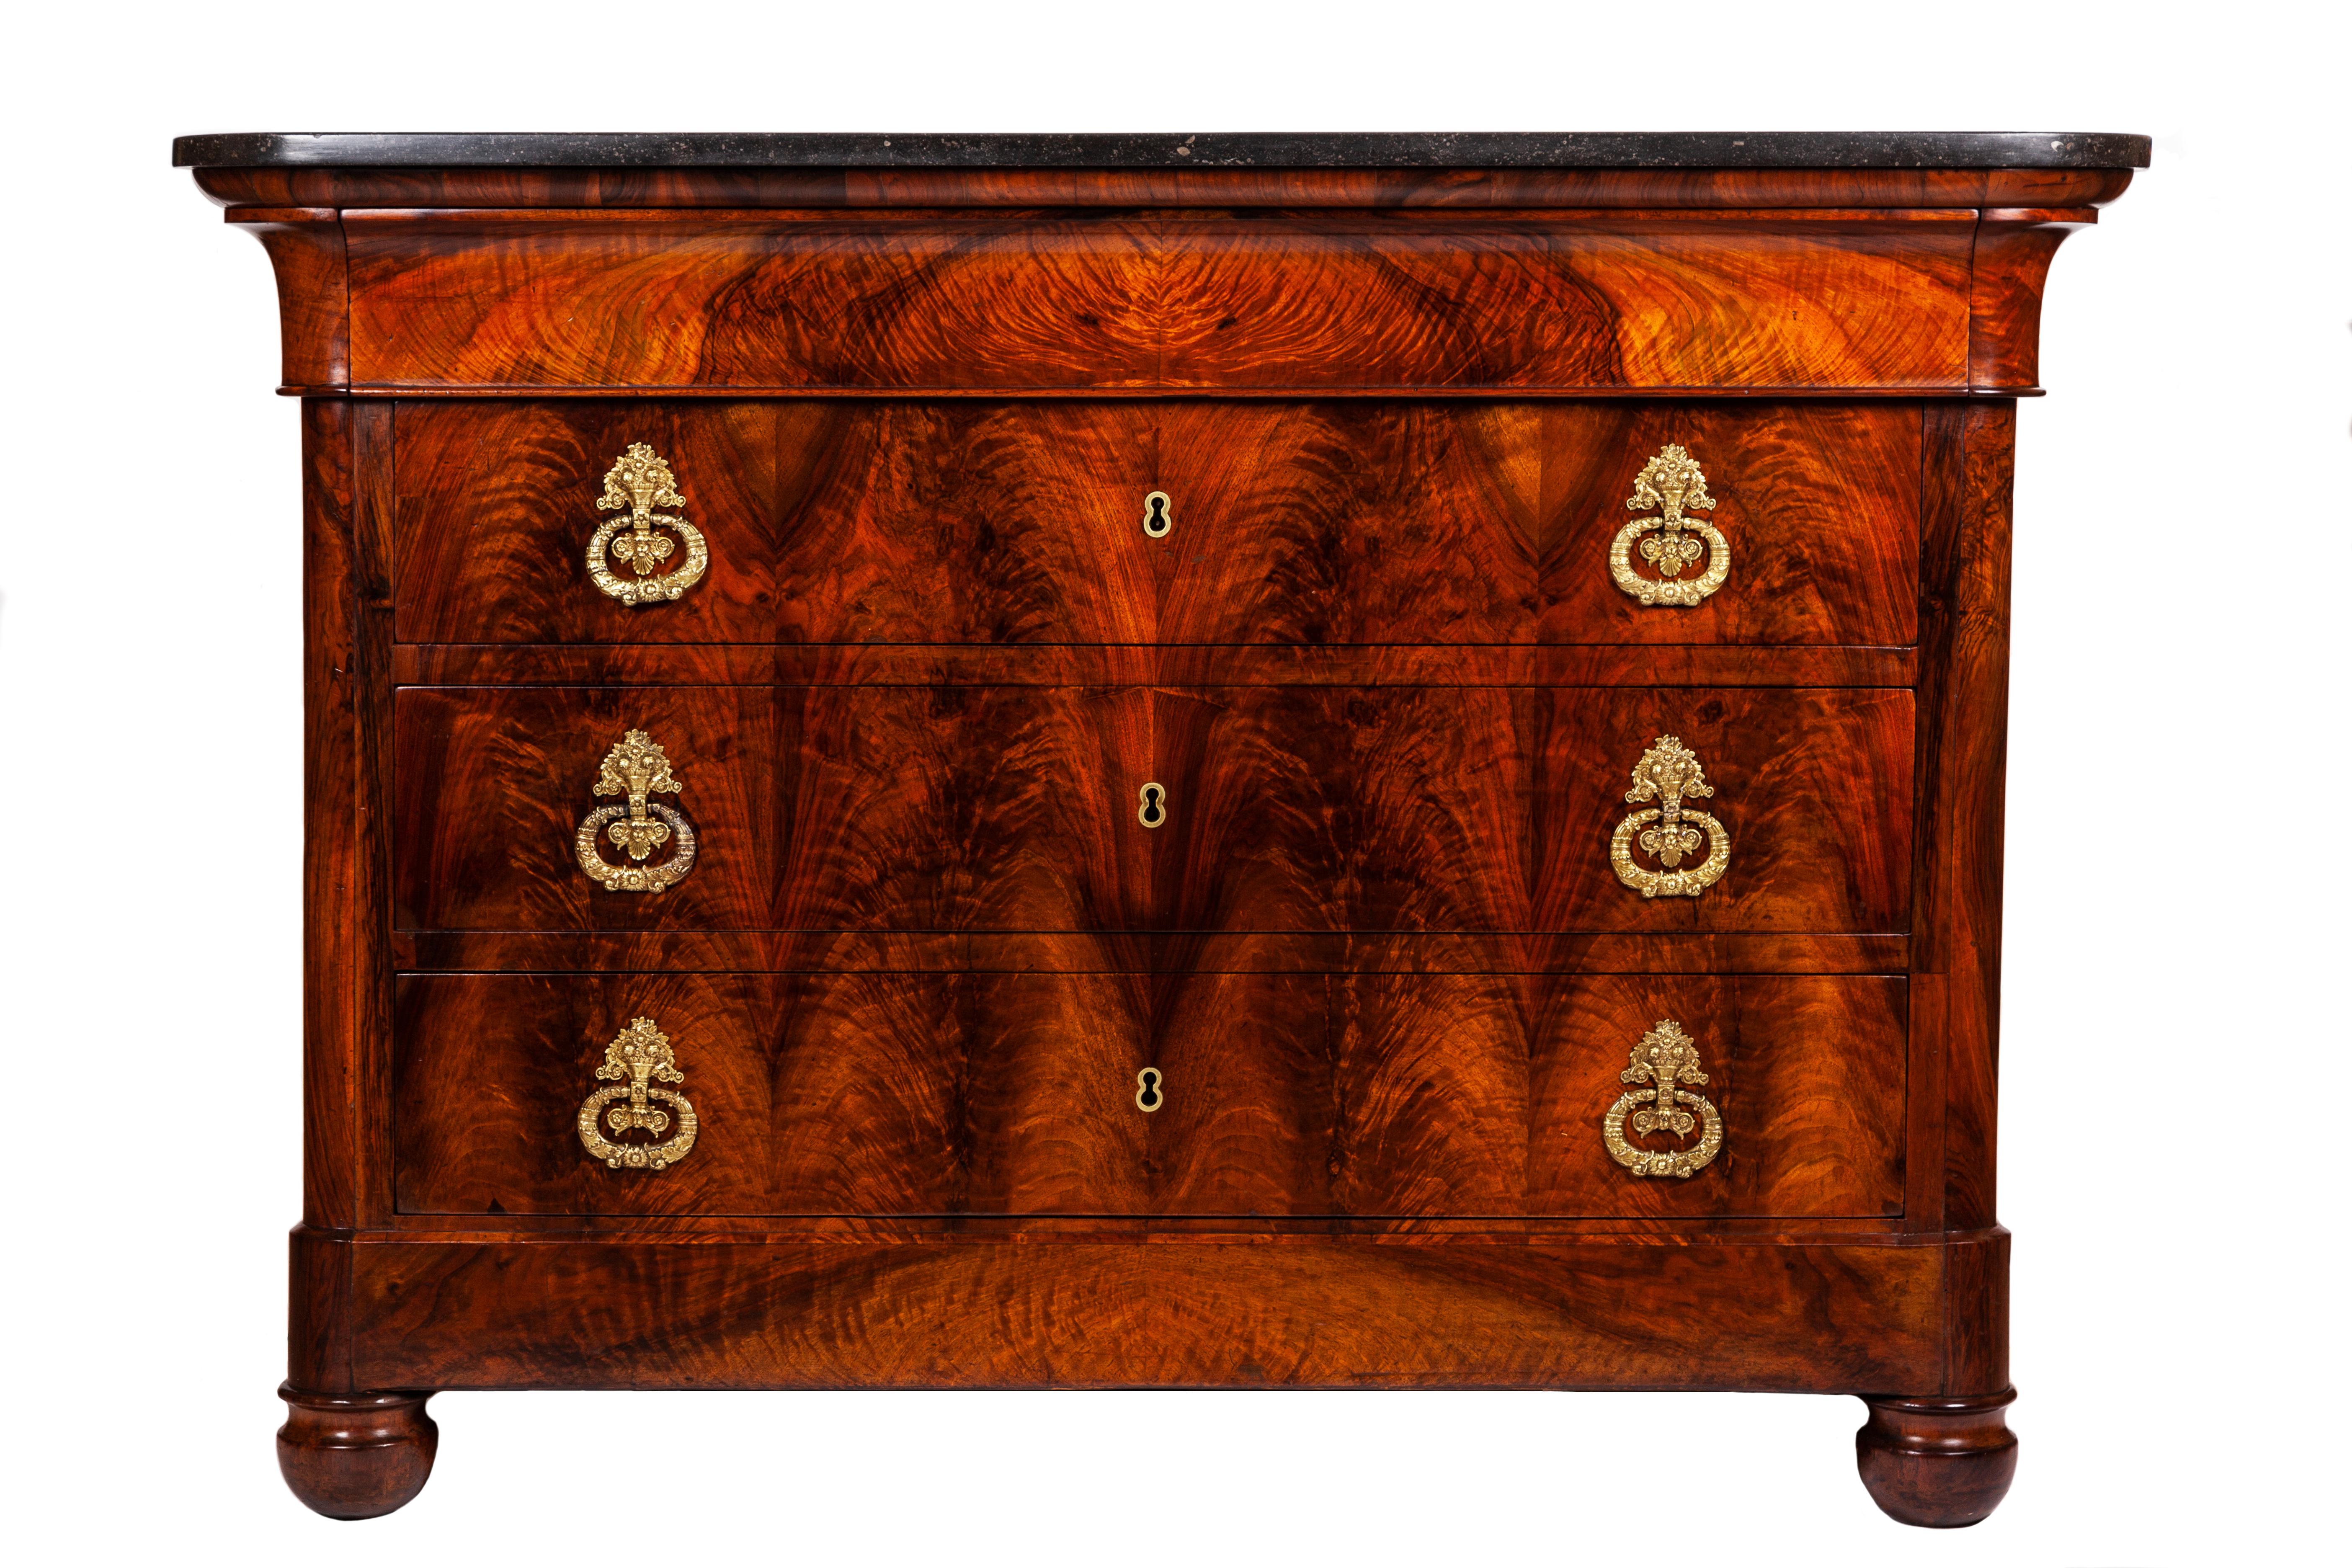 Elegant French Restaurazione dresser commode, first half of the 19th century. 
Flamed walnut, with black marble top, with one working key and four drawers.

High quality dresser.
Its elegant shapes and bronze handles give versatility to this